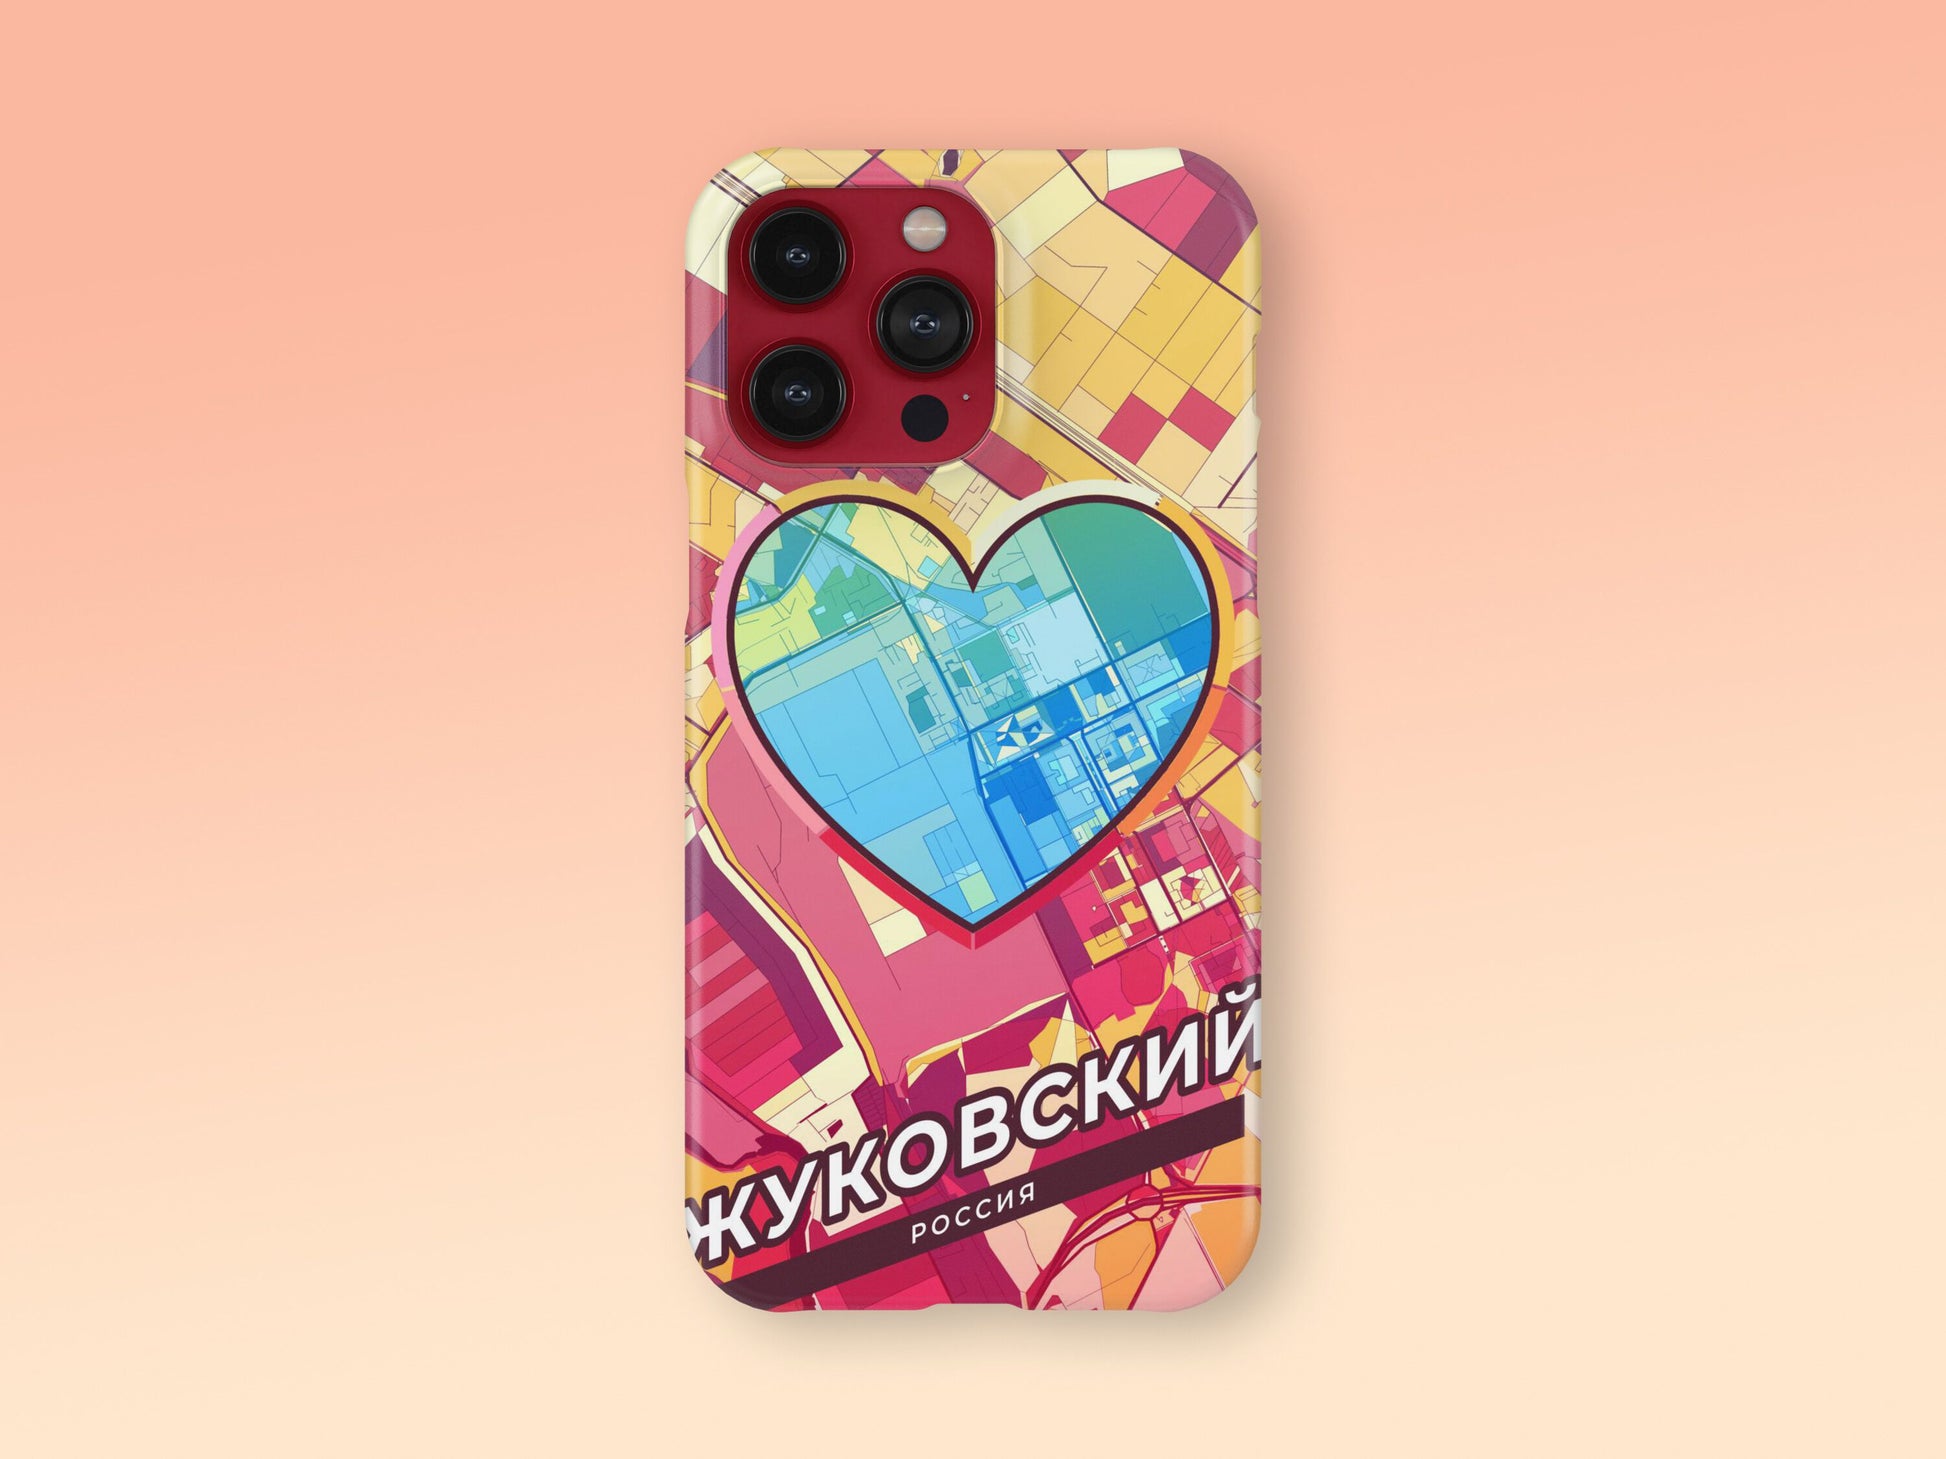 Zhukovsky Russia slim phone case with colorful icon 2